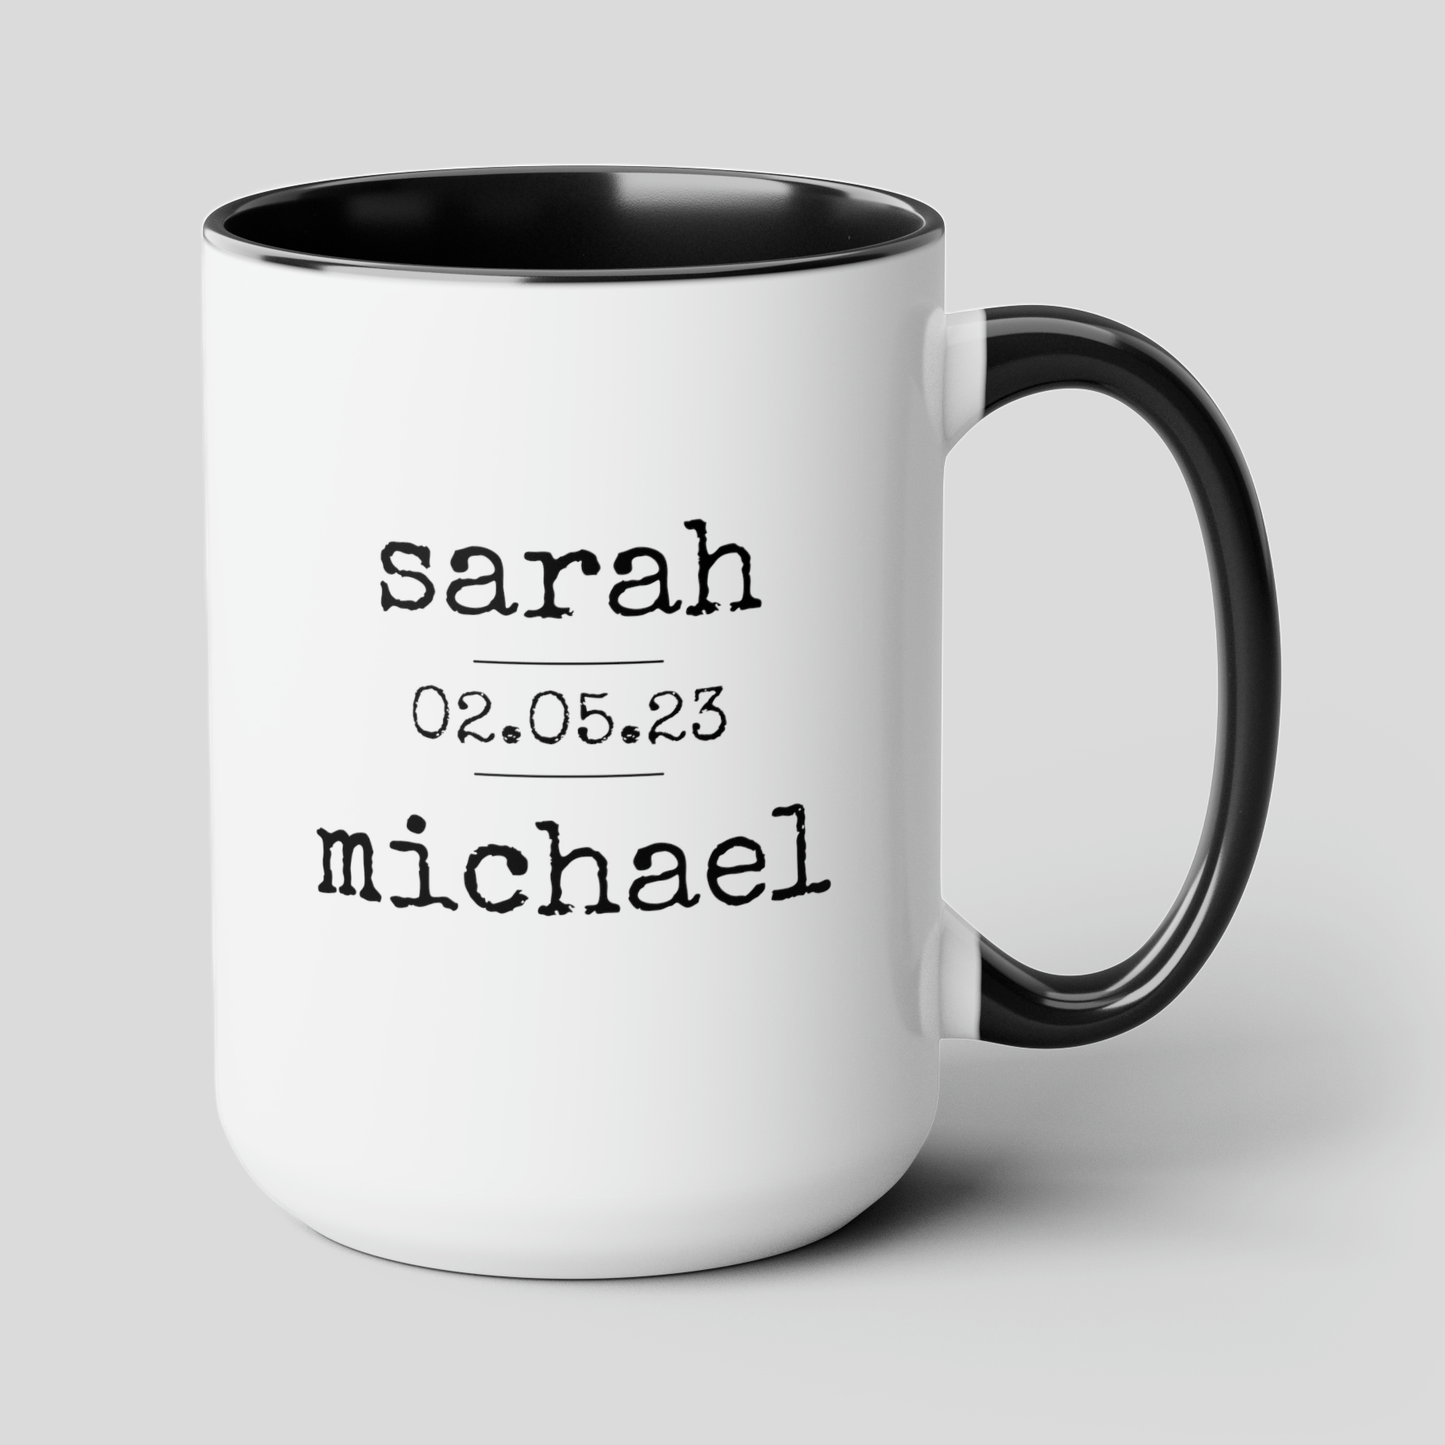 Couple Anniversary Wedding Name Date 15oz white with black accent funny large coffee mug gift for wedding engagement bride anniversary custom customized personalized waveywares wavey wares wavywares wavy wares cover